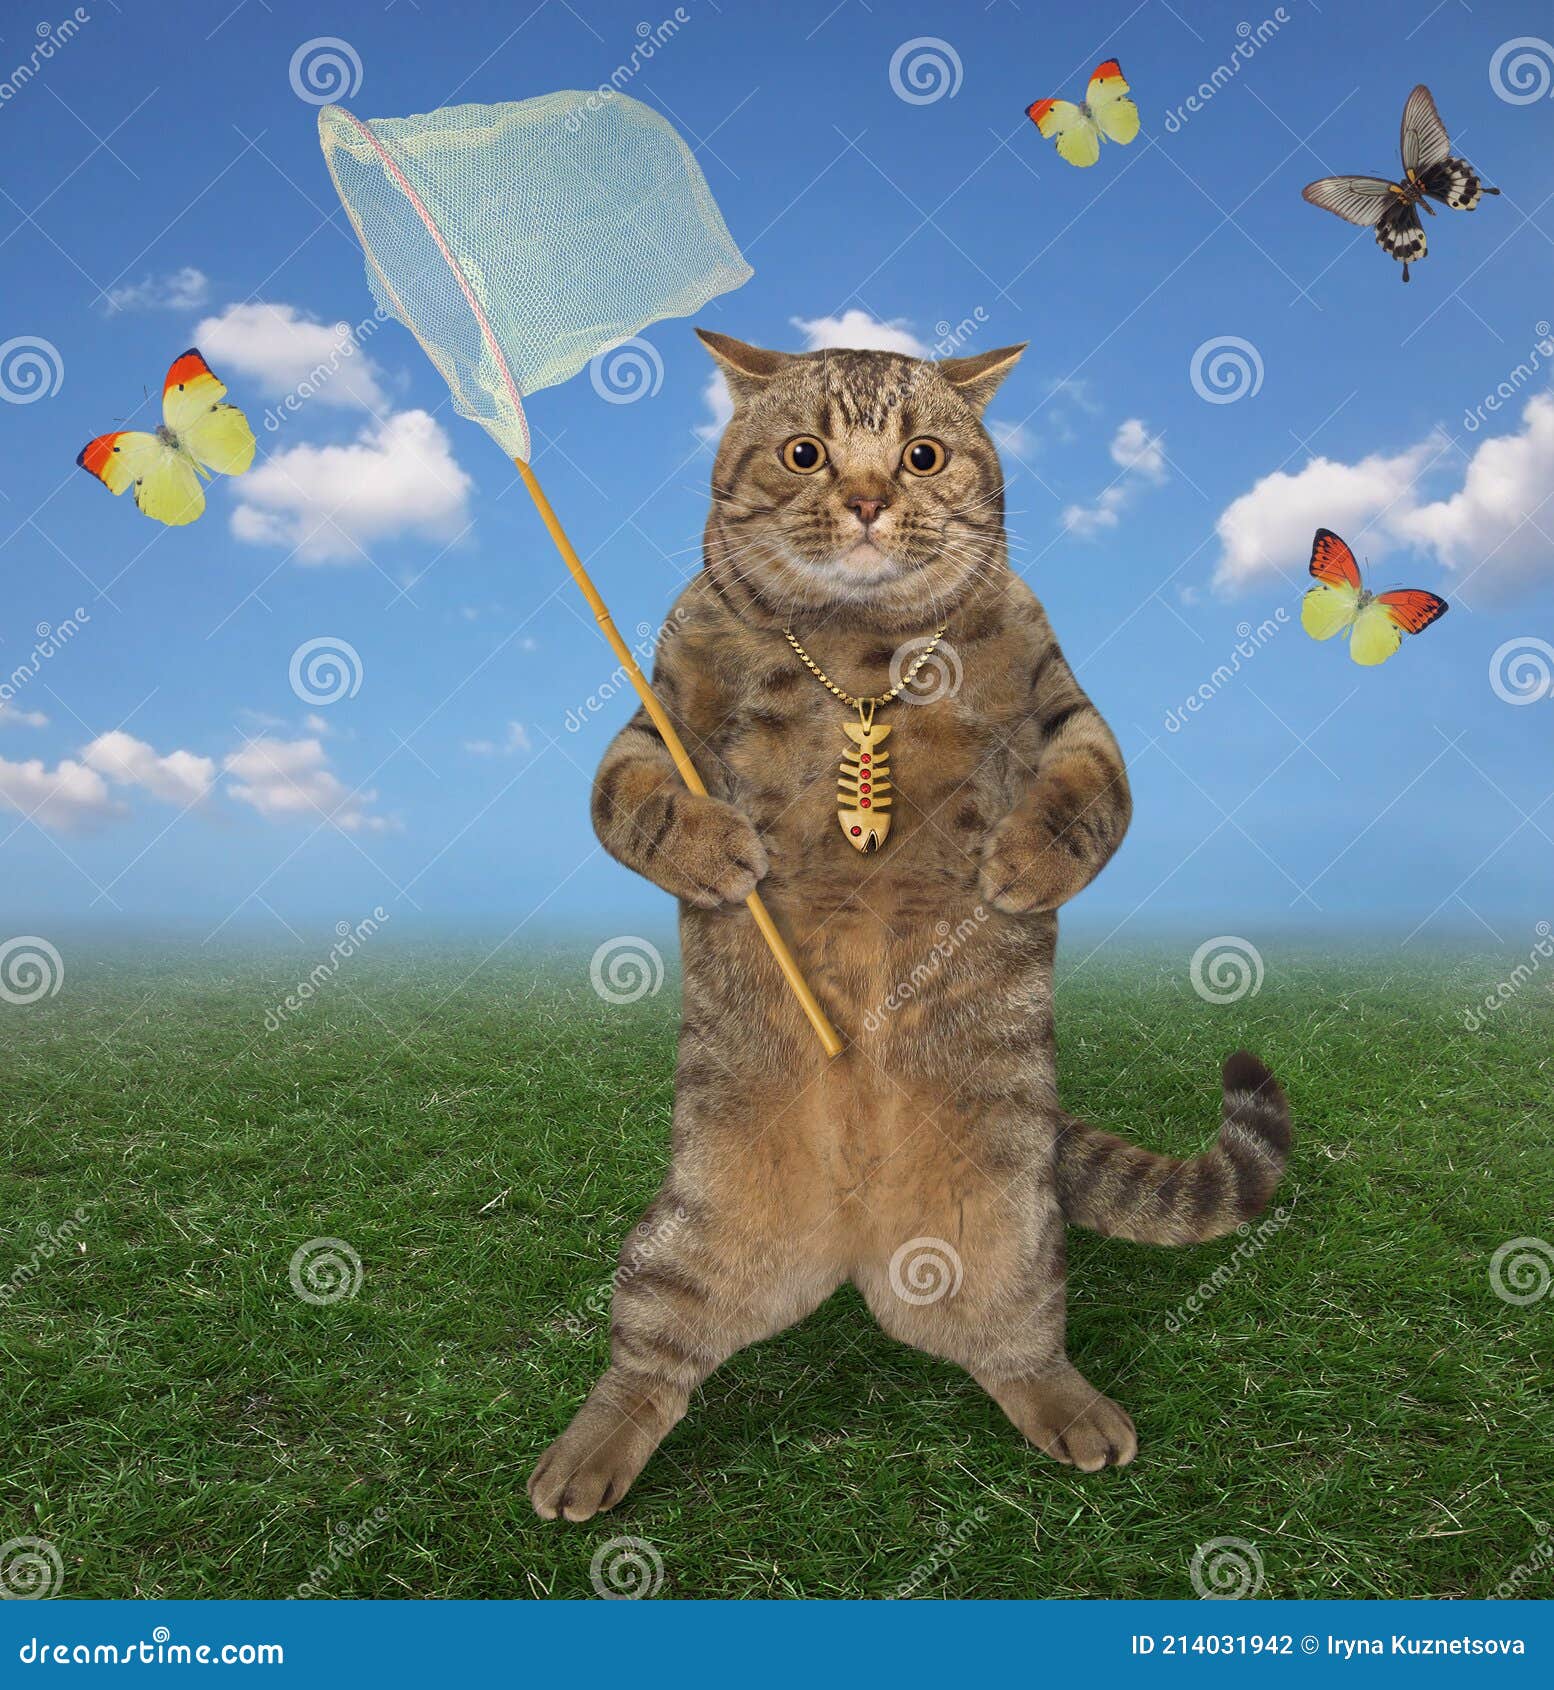 Cat Catches Butterflies in Meadow Stock Photo - Image of fantasy